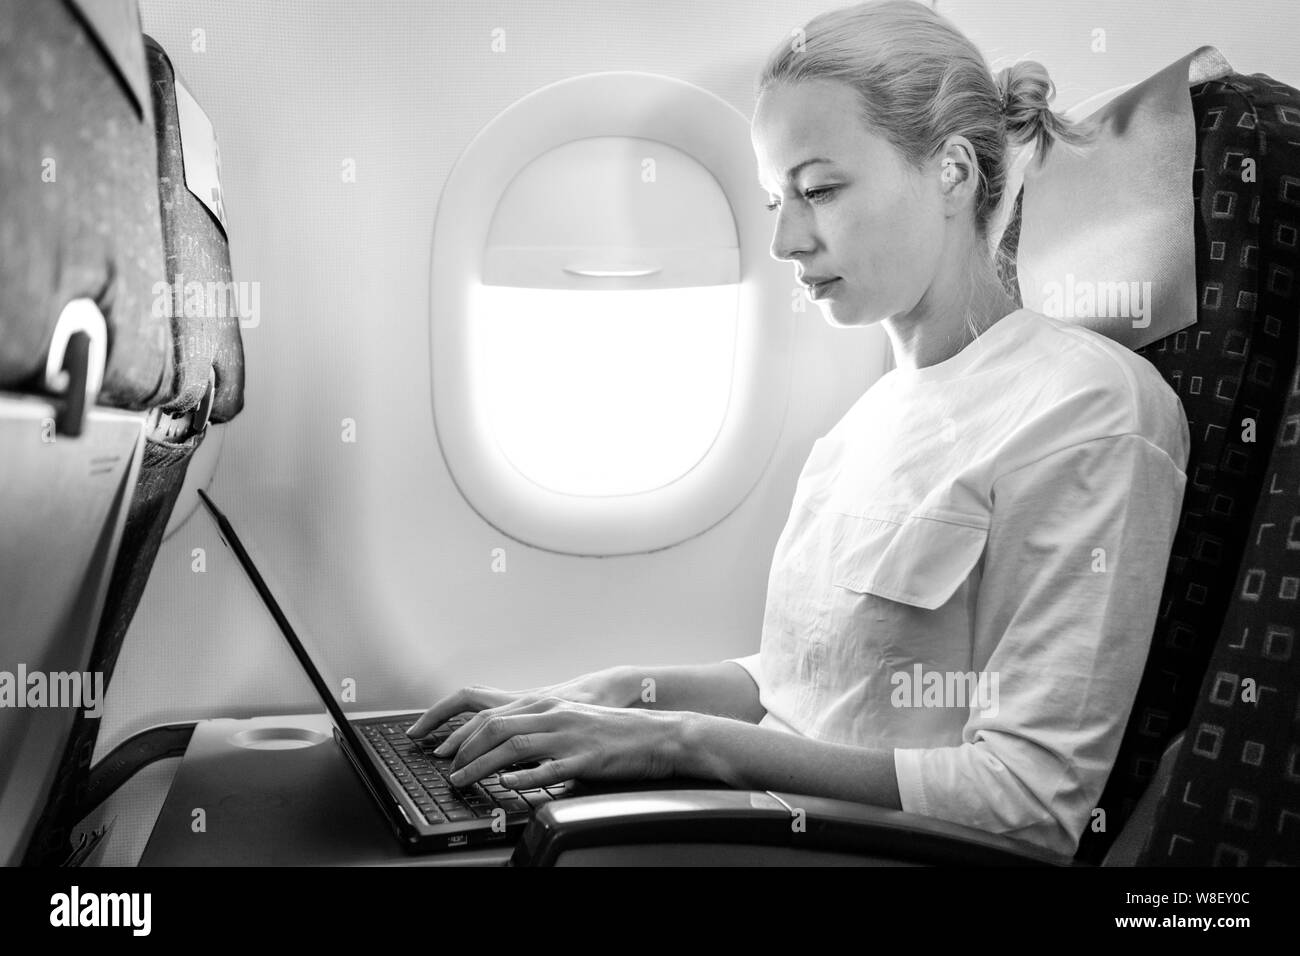 Attractive caucasian female passenger working at modern laptop computer using wireless connection on board of commercial airplane flight Stock Photo